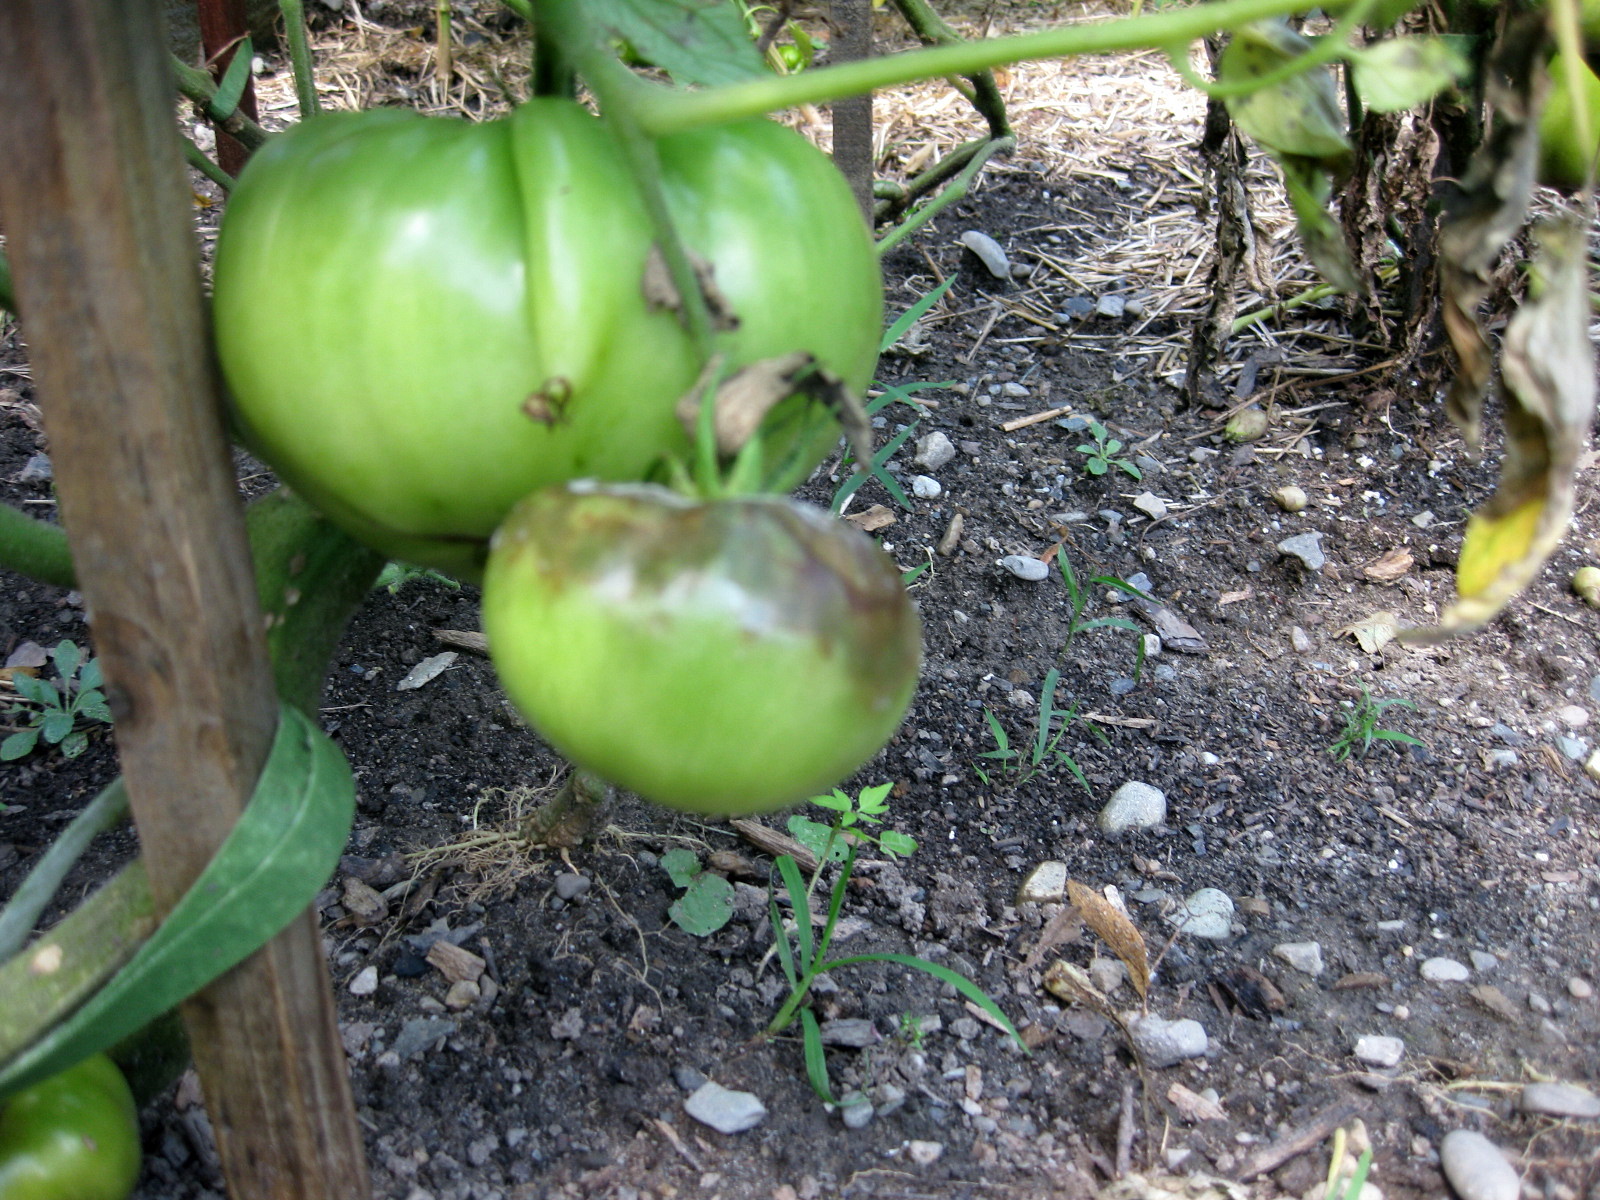 Oh, No! Late Blight on My Tomatoes